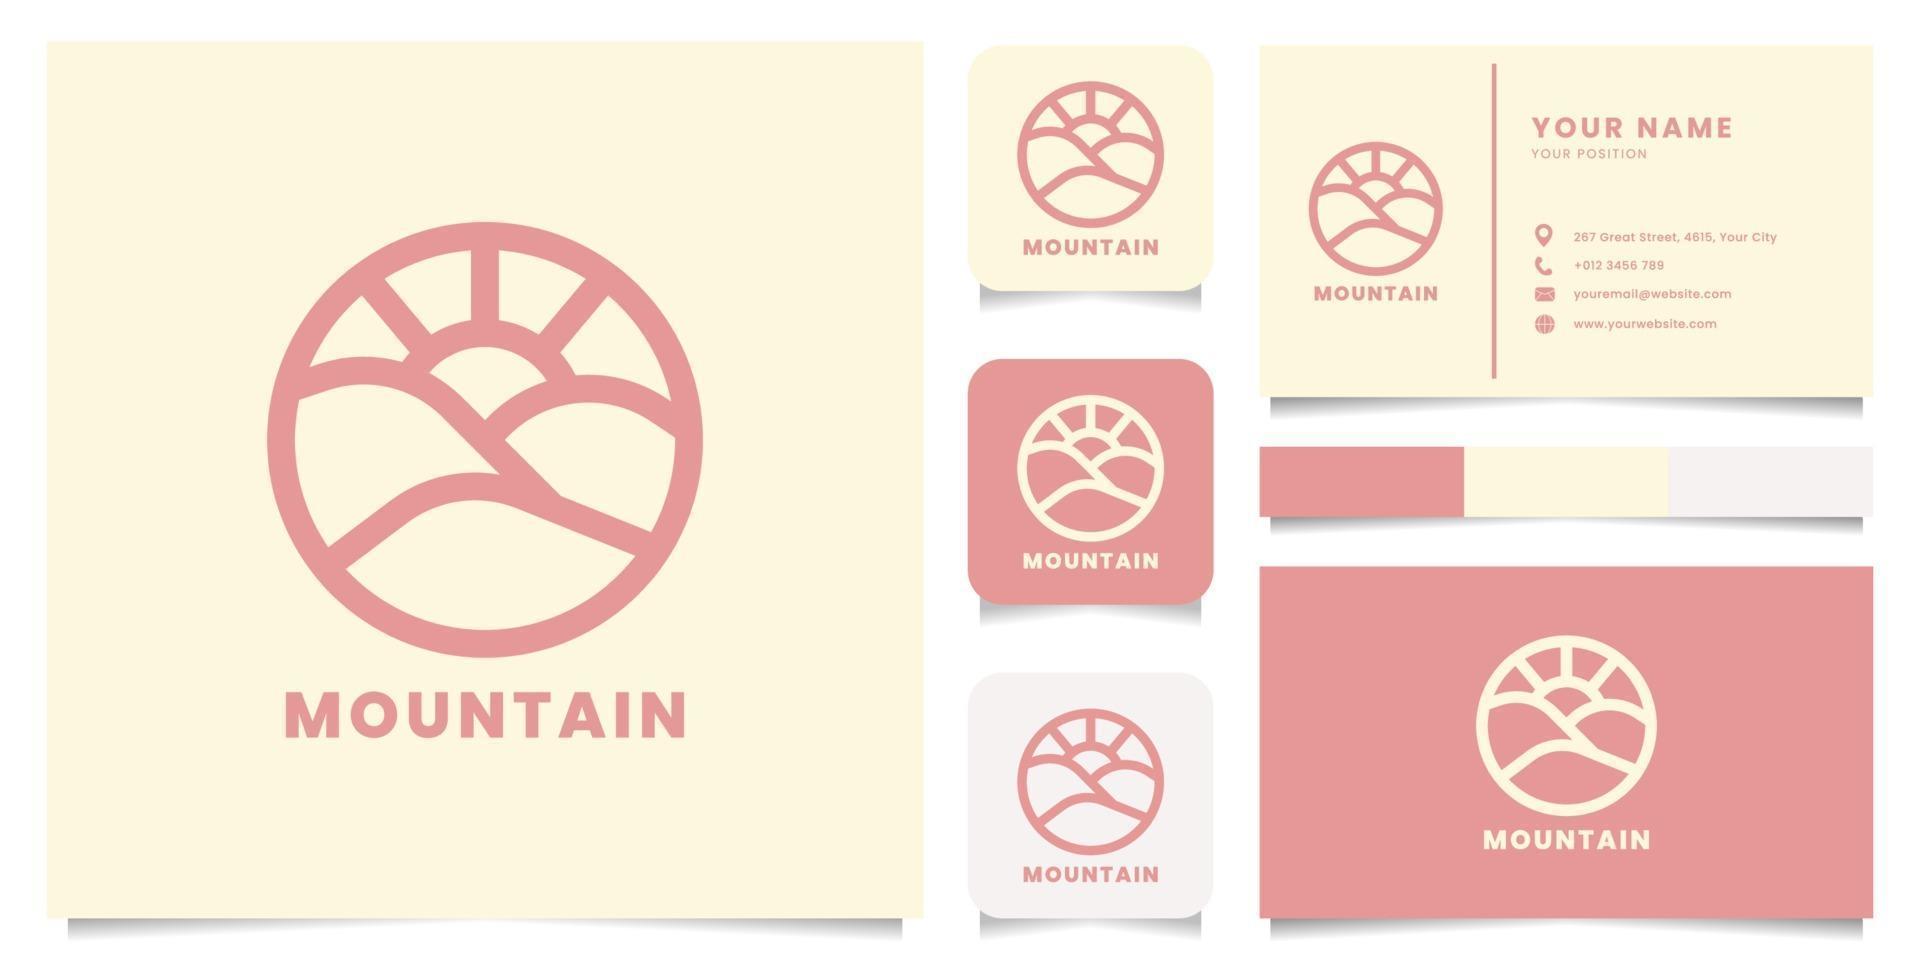 Mountain Logo with Business Card Template vector